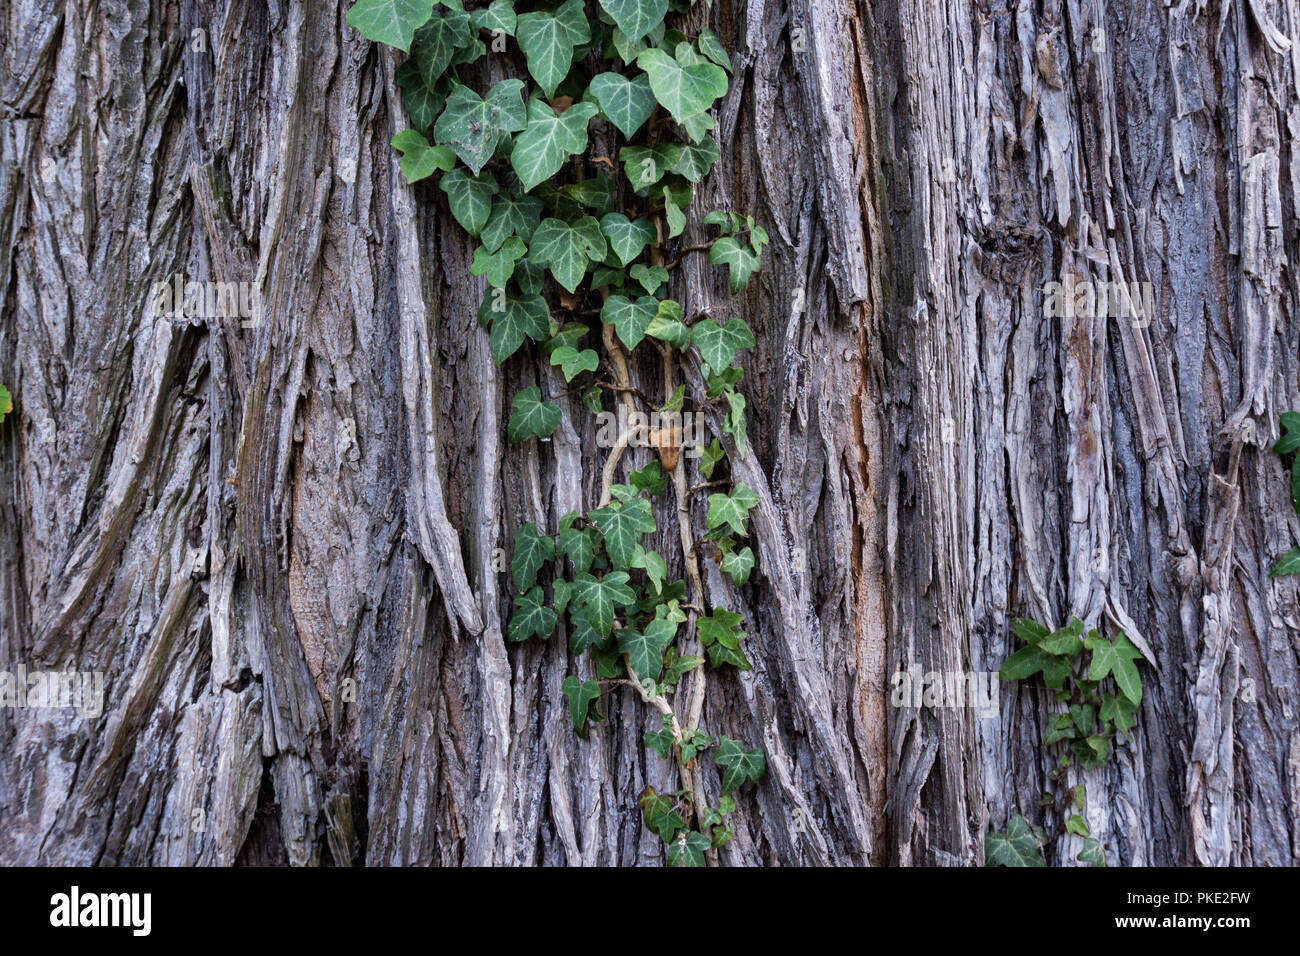 Berlin, Germany, September 08, 2018: Close-Up of Ivy Plant on Old Tree Stock Photo